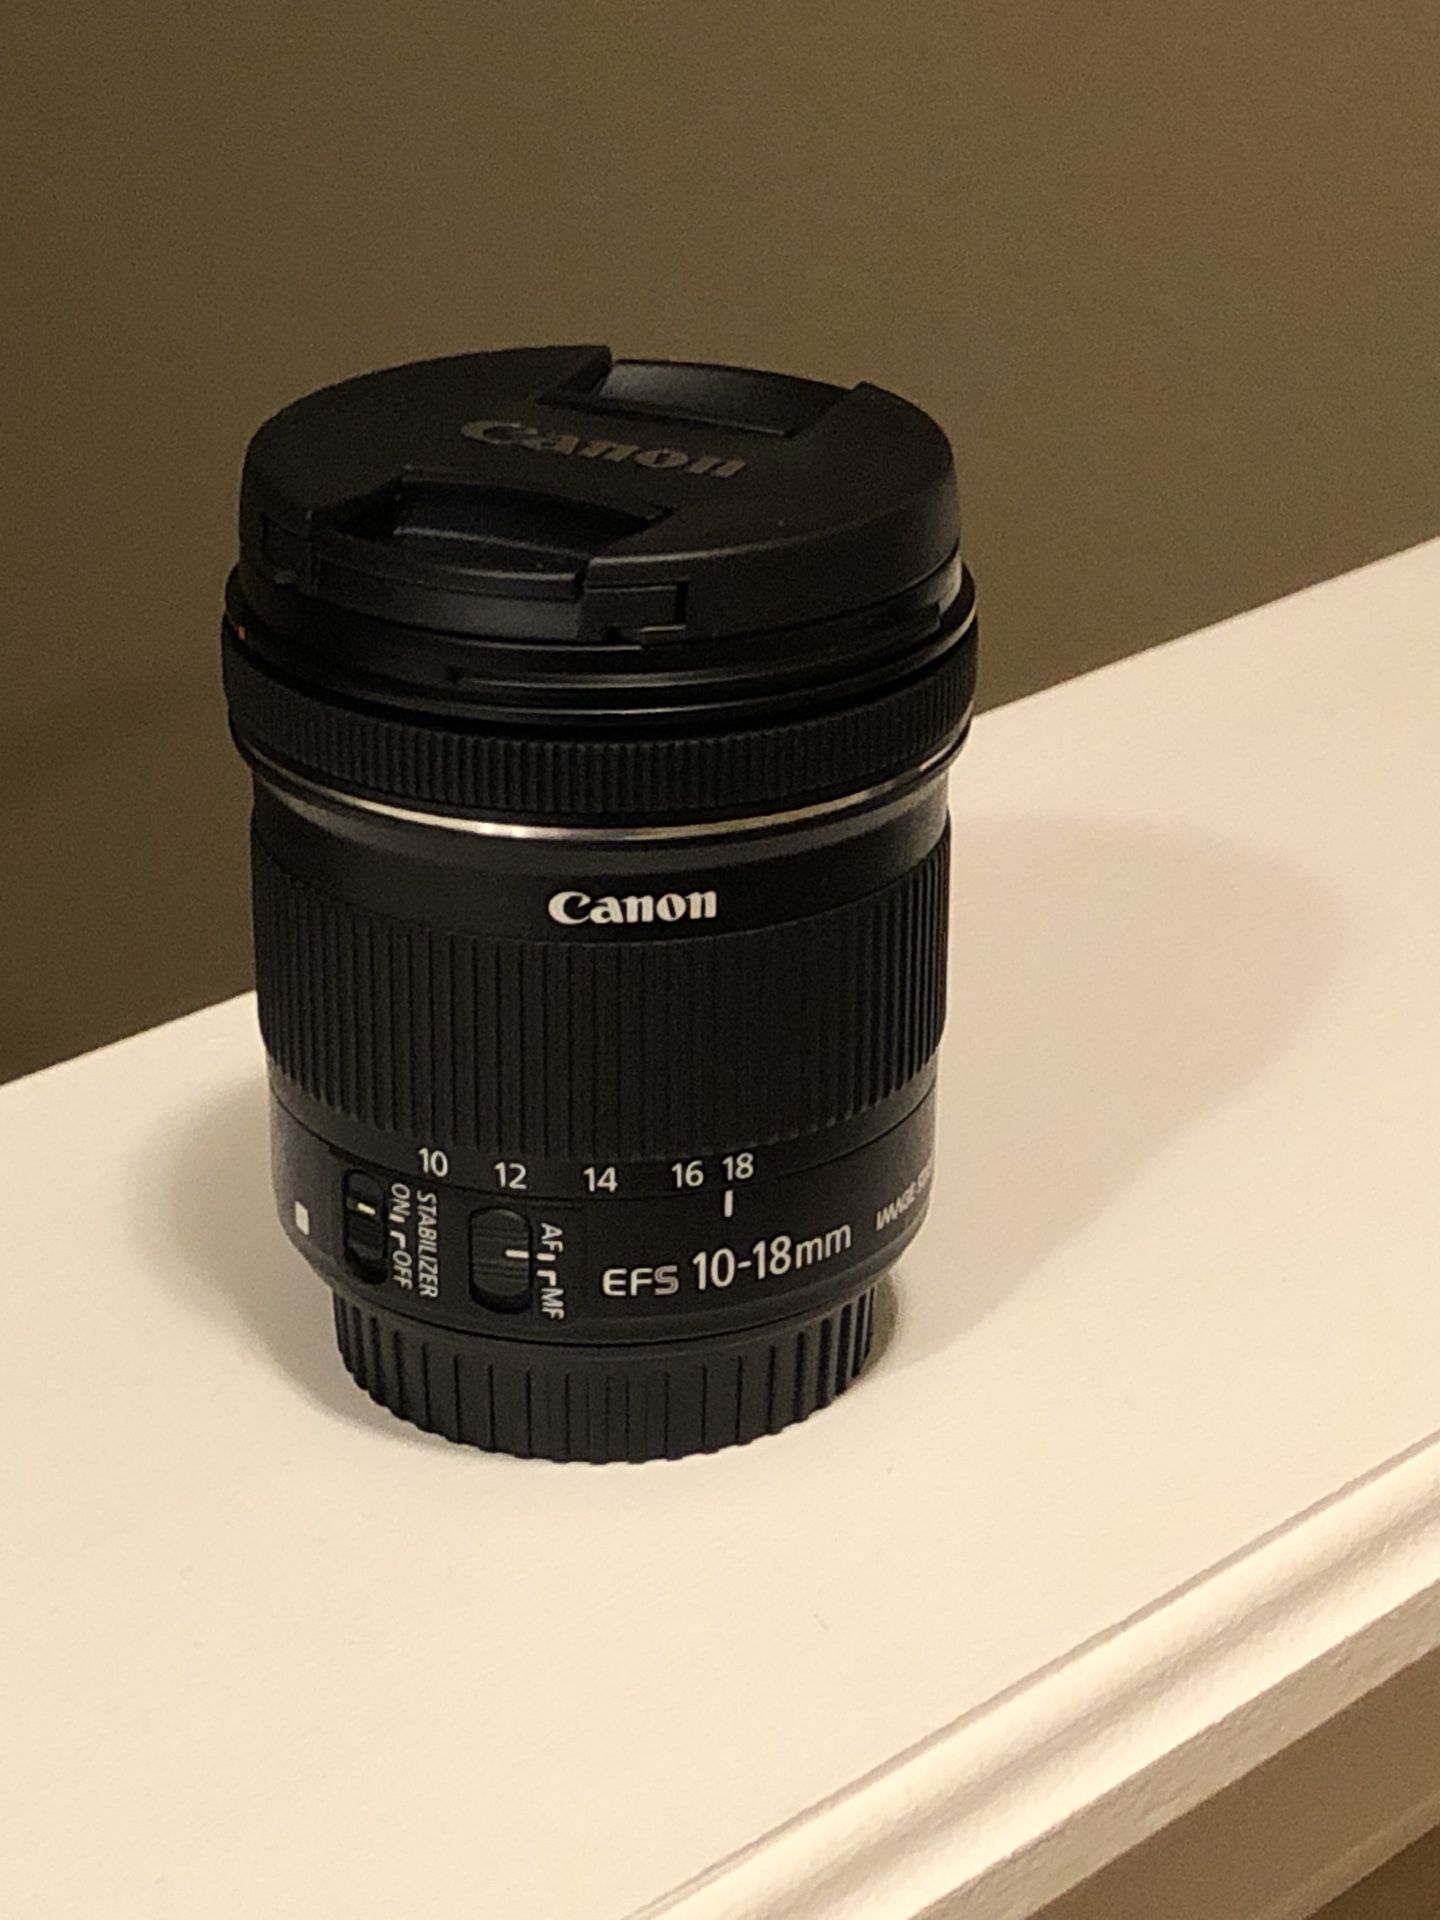 Canon EF-S 10-18mm f/4.5-5.6 lens